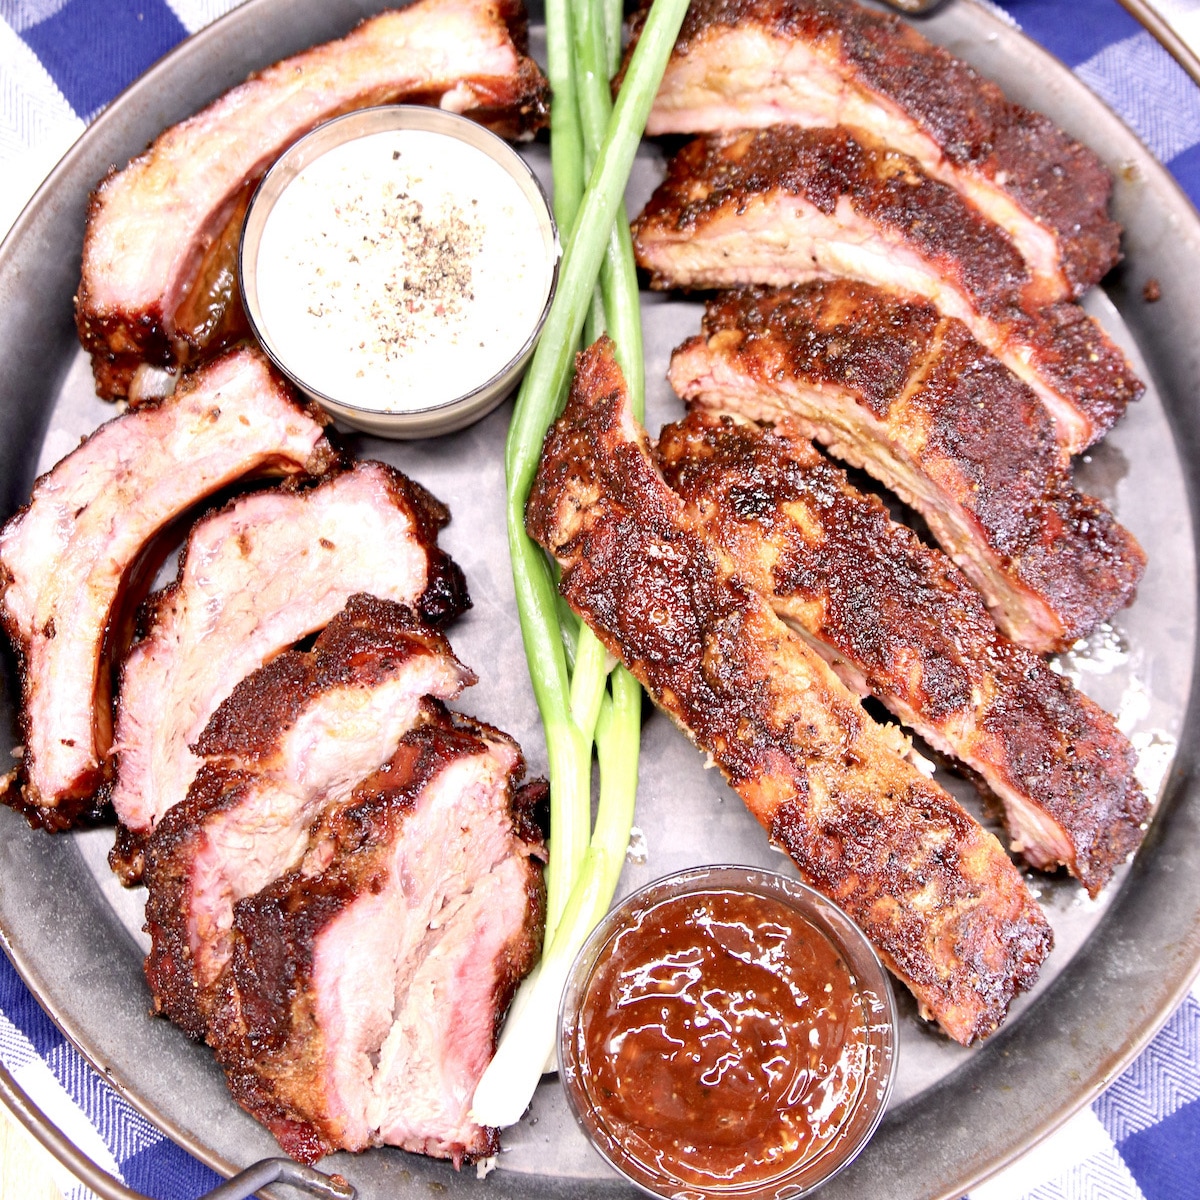 Platter with sliced baby back ribs, green onions, 2 bowls of sauce.